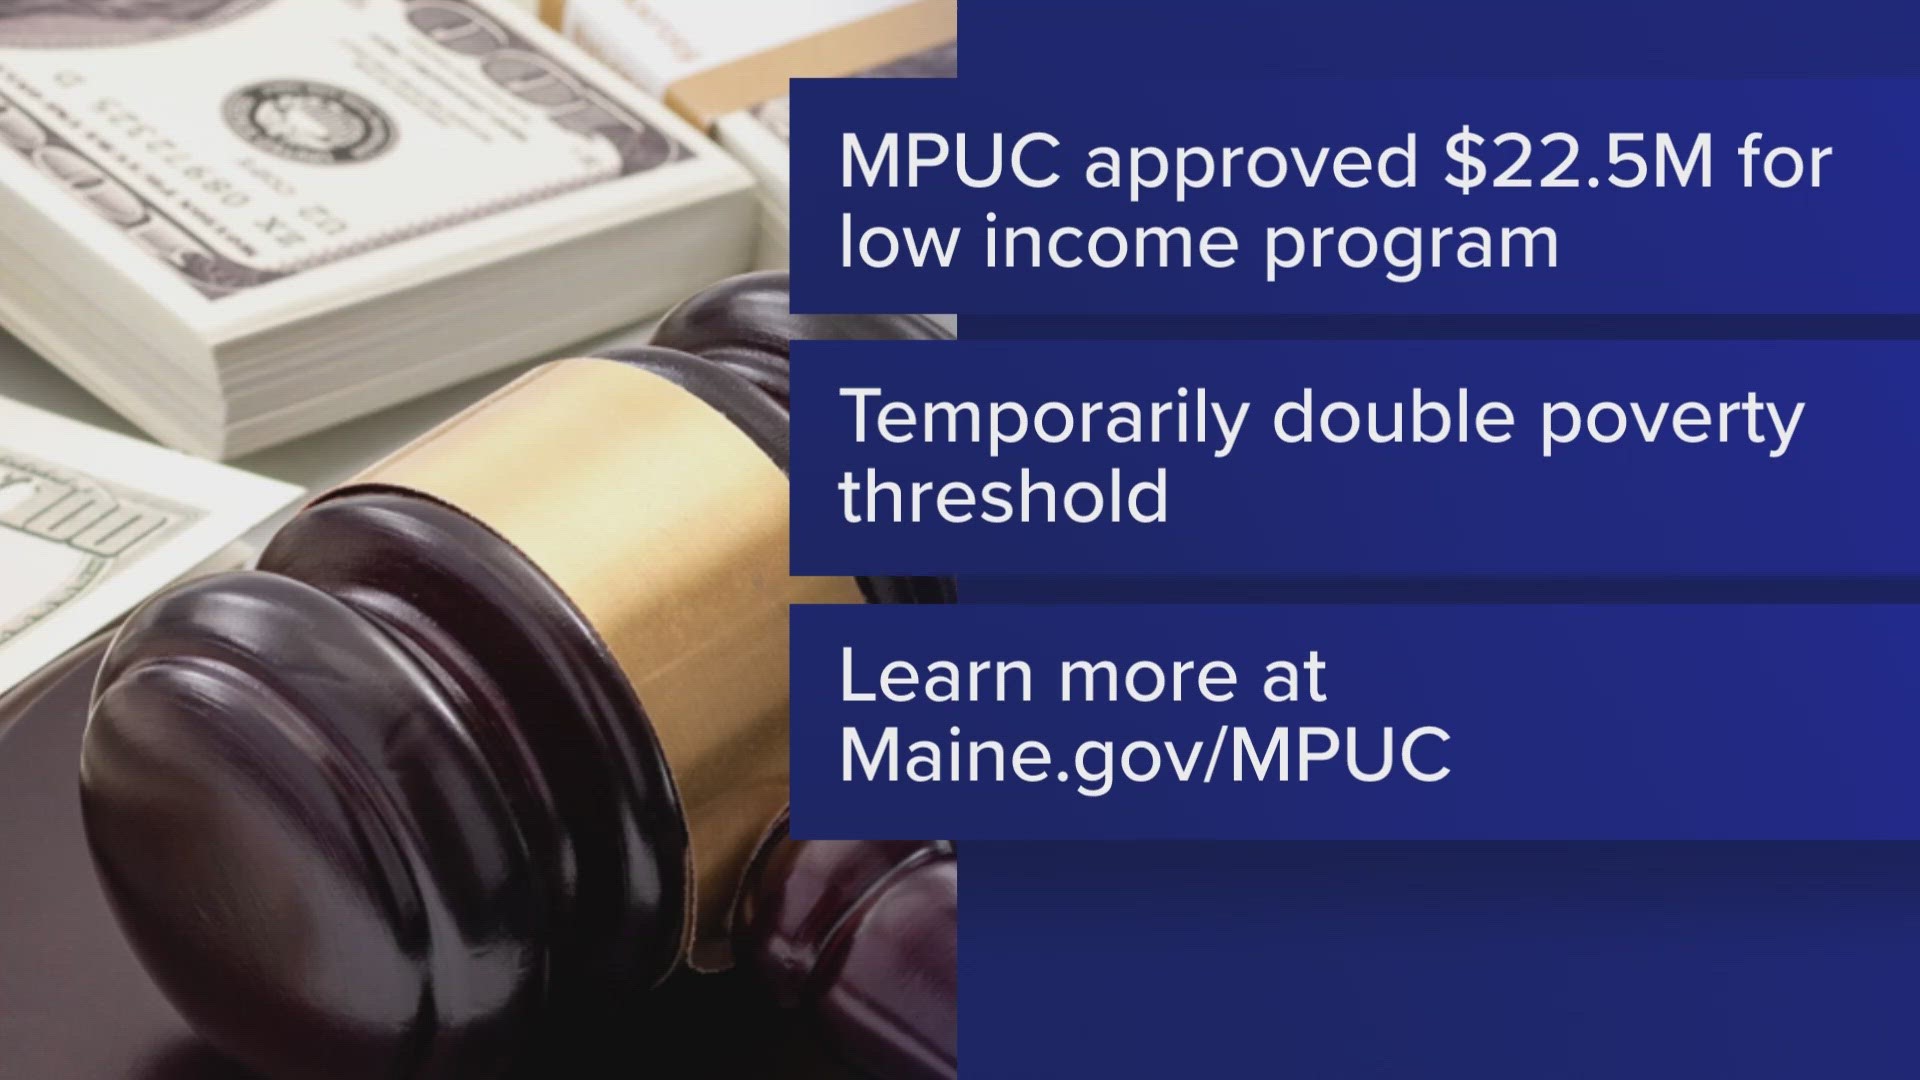 More than $22.5 million was approved for low-income Mainers. The commission is also temporarily doubling the poverty threshold for assistance.